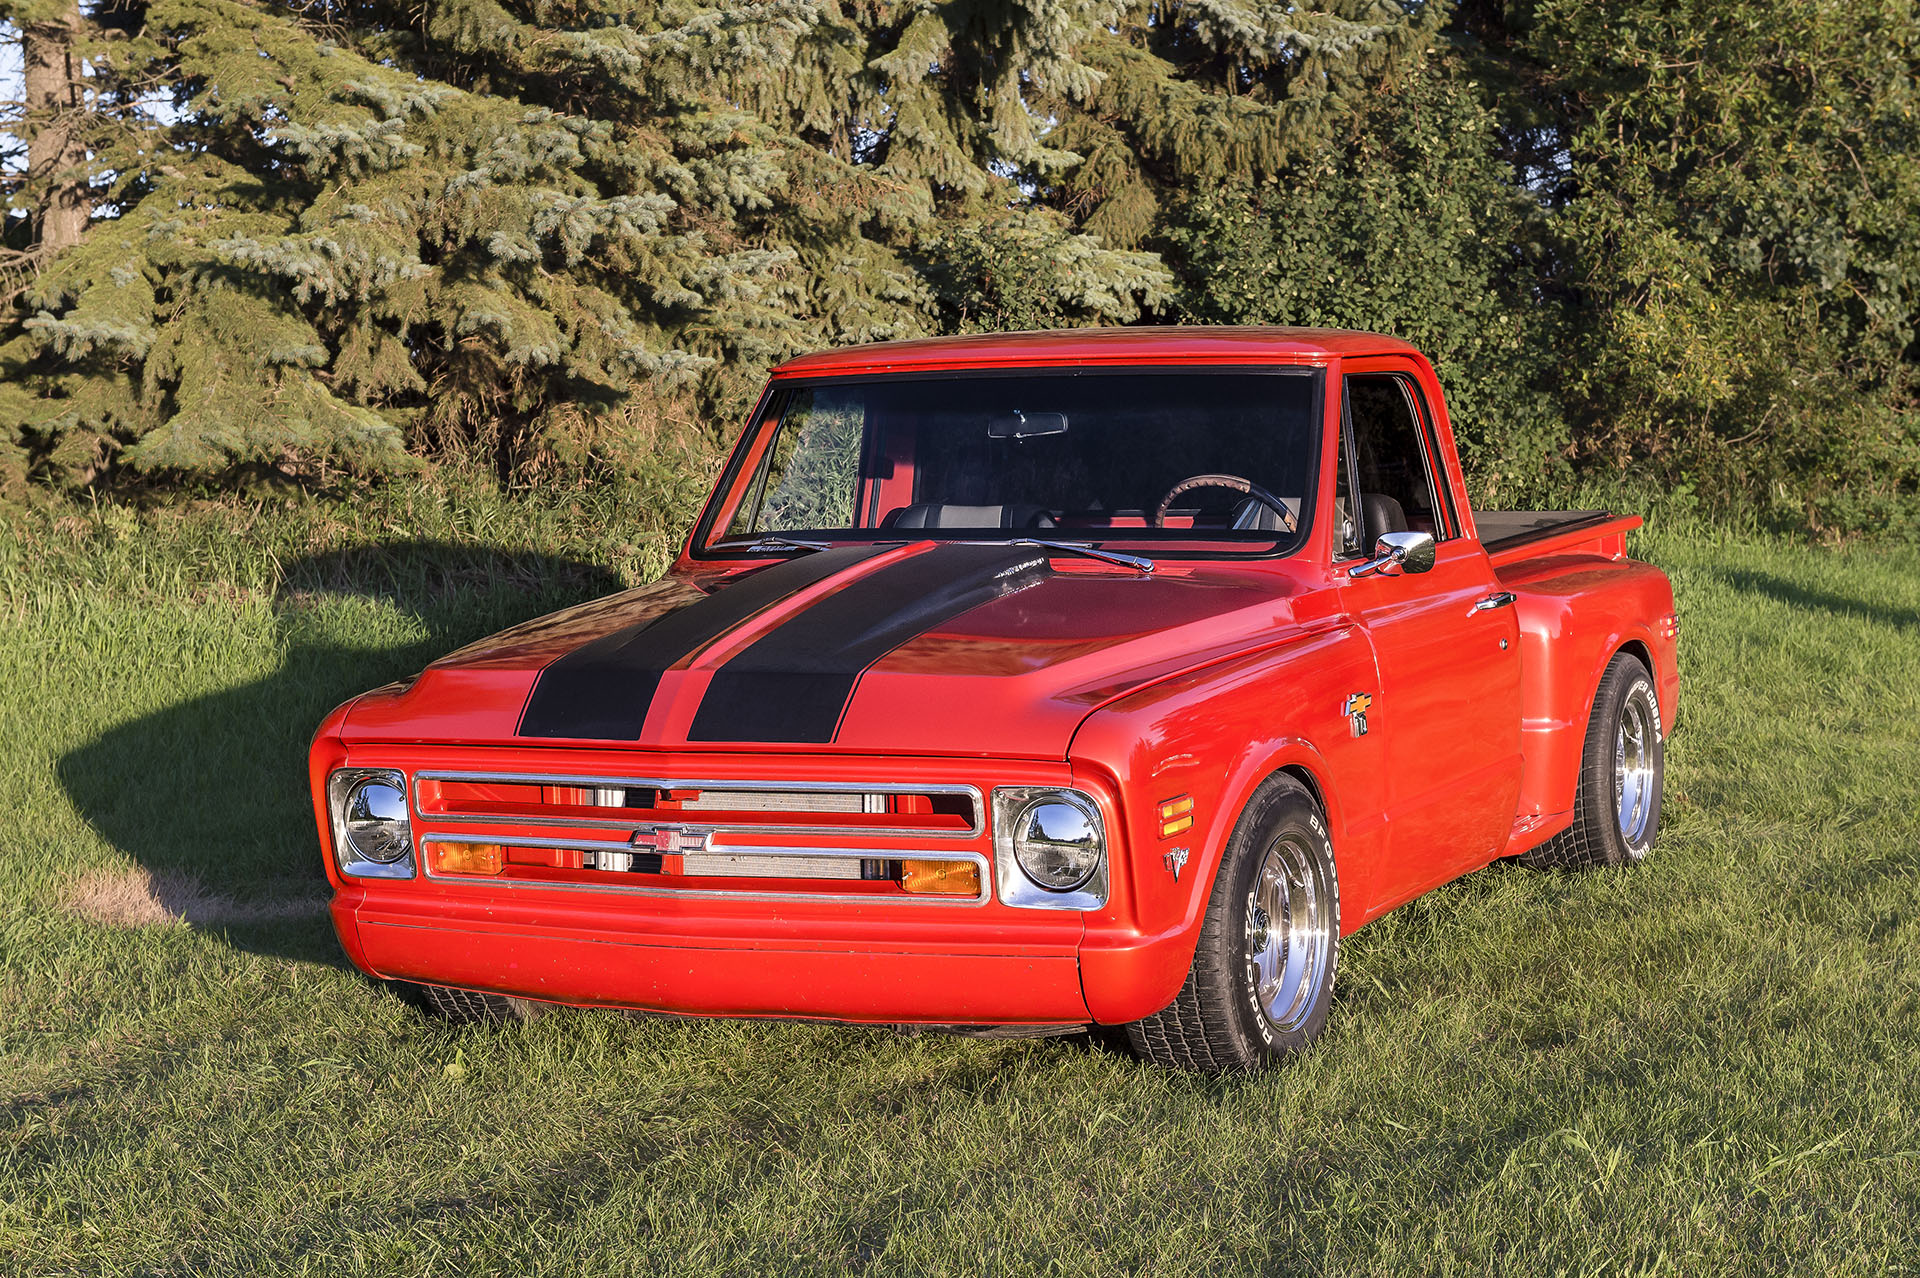   1968 Chevy C10 Short Box Step Side    Engine is a ZZ502 with an override Transmission.&nbsp; Full air bag suspension with Bluetooth control.&nbsp; Dakota digital gauges.&nbsp; American custom low back seatsThis truck is locally owned and you will s